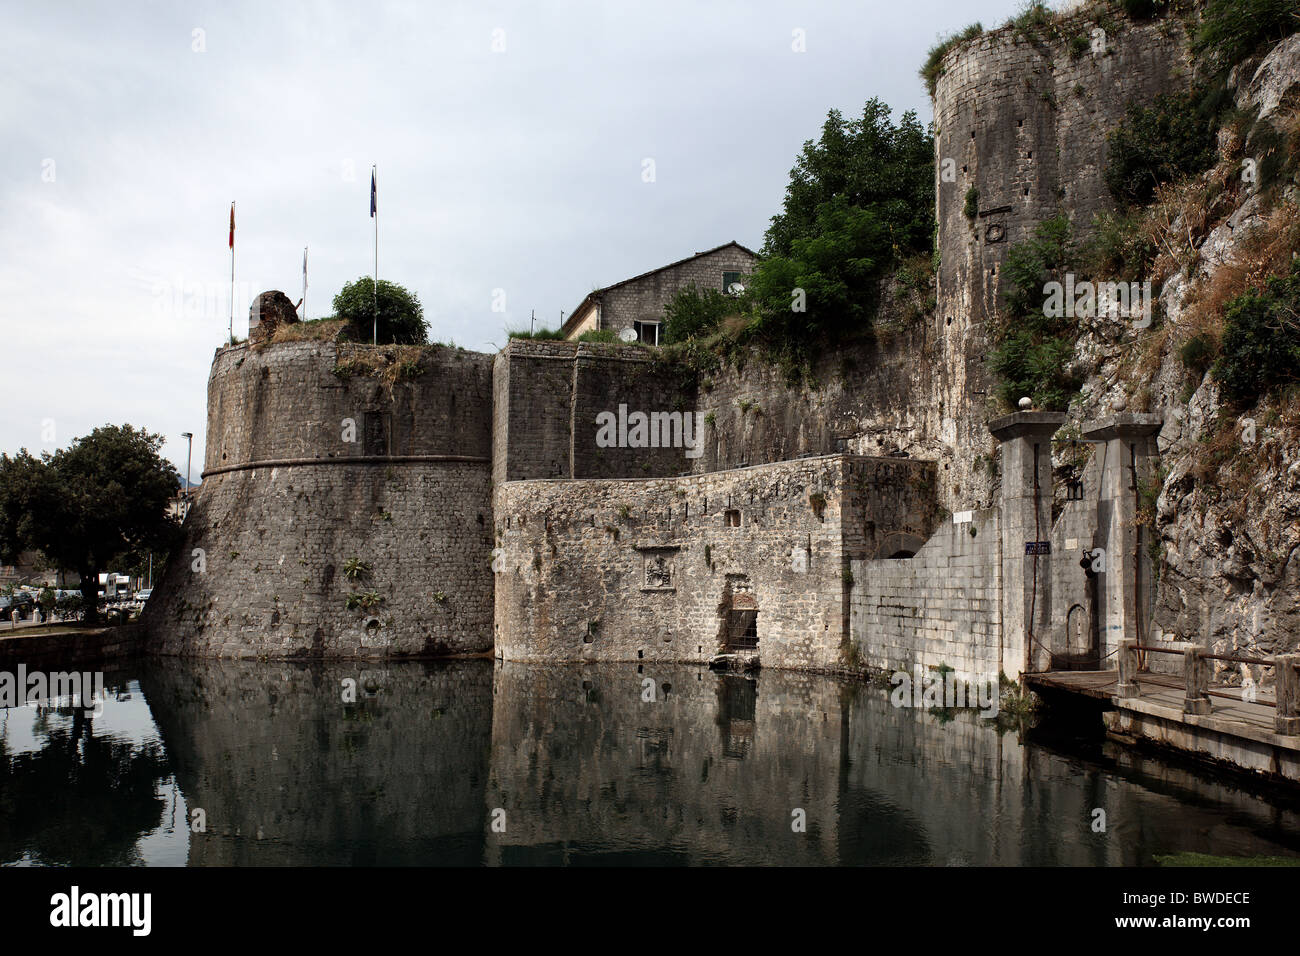 Town Wall, Old City of Kotor, Montenegro. Stock Photo